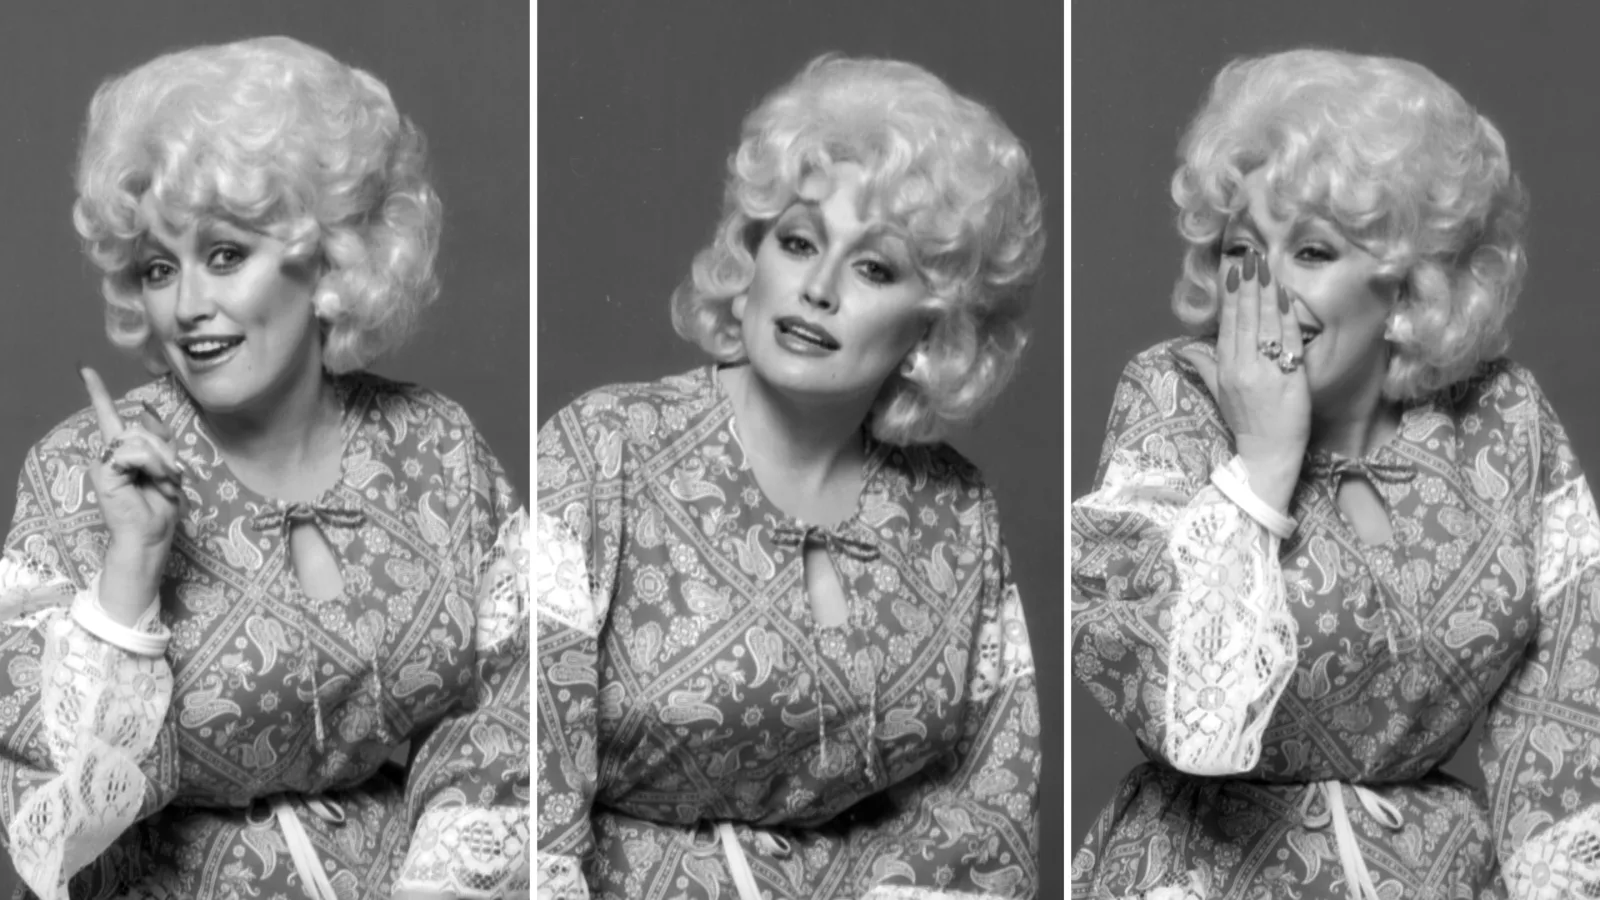 Dolly Parton Anal Sex Movies - Queen of Country Music Dolly Parton Takes On the Playboy Interview